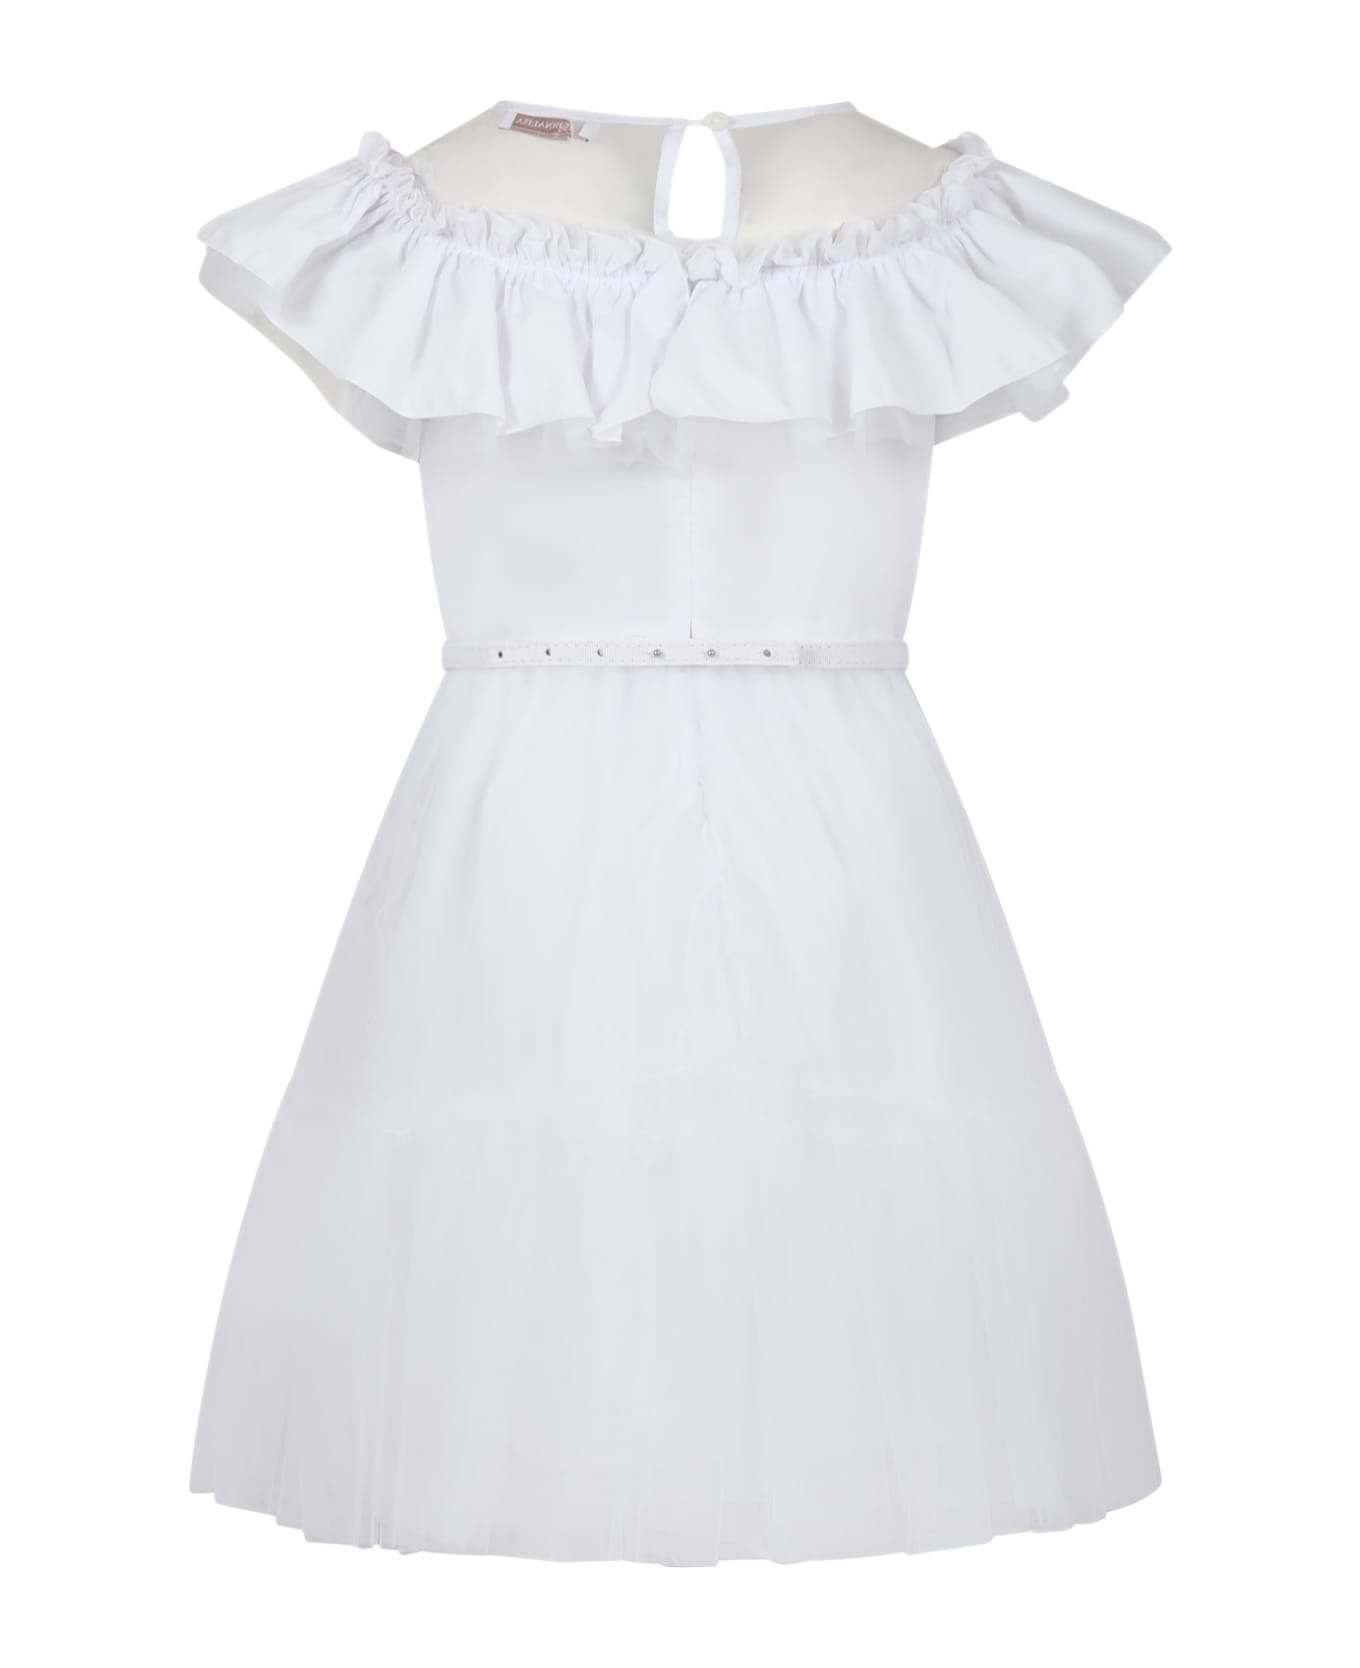 Monnalisa White Dress For Girl With Tulle And Ruffles - White ワンピース＆ドレス